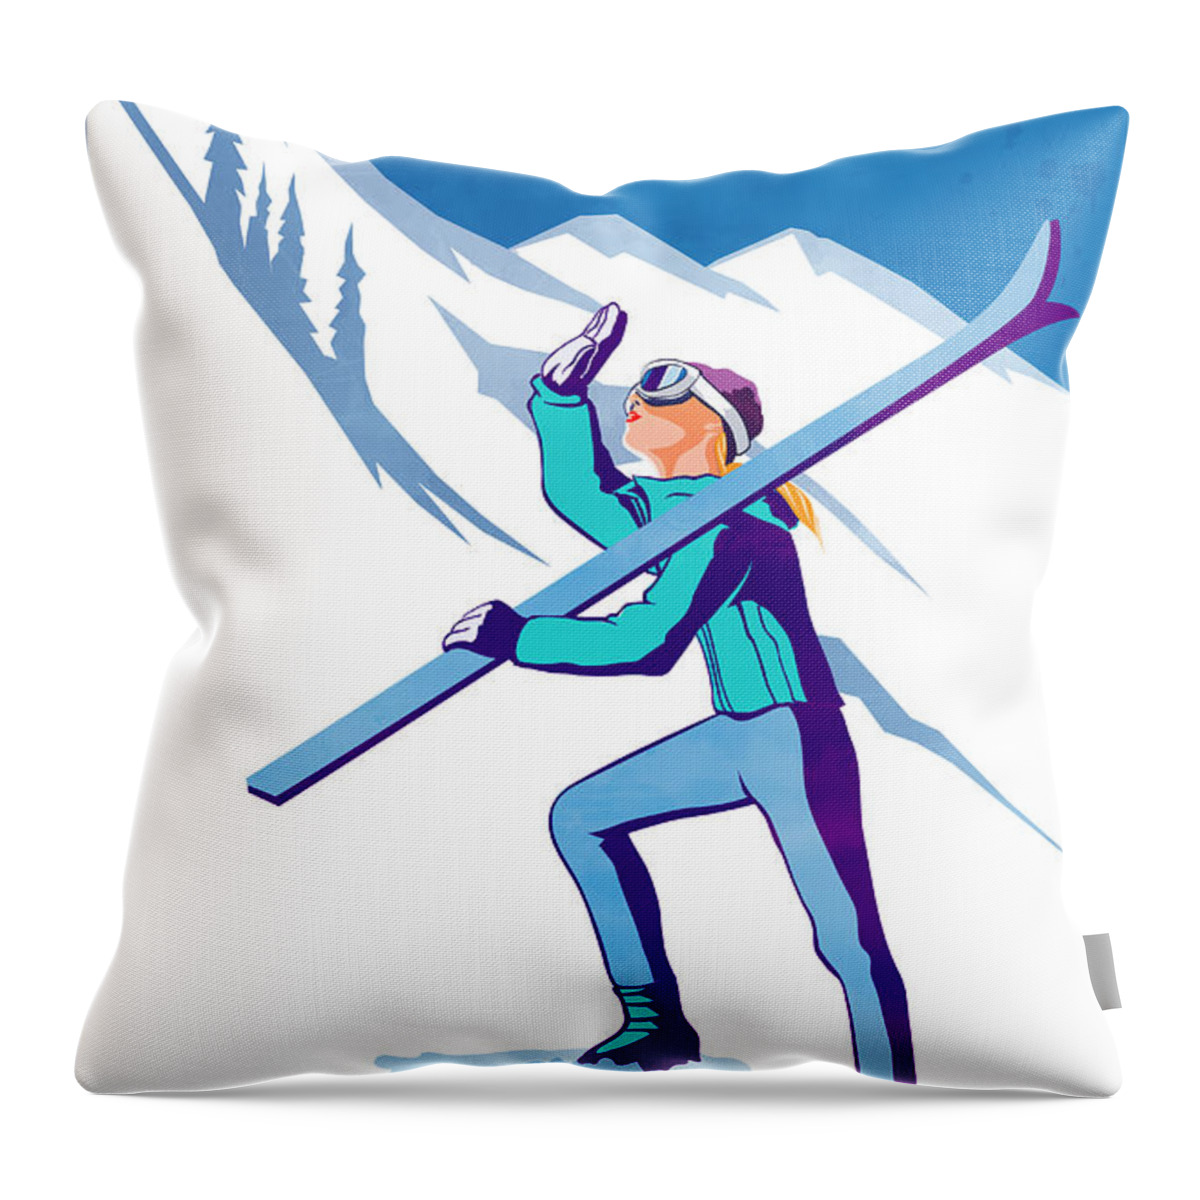 Ski Poster Throw Pillow featuring the painting Ski the Rockies by Sassan Filsoof